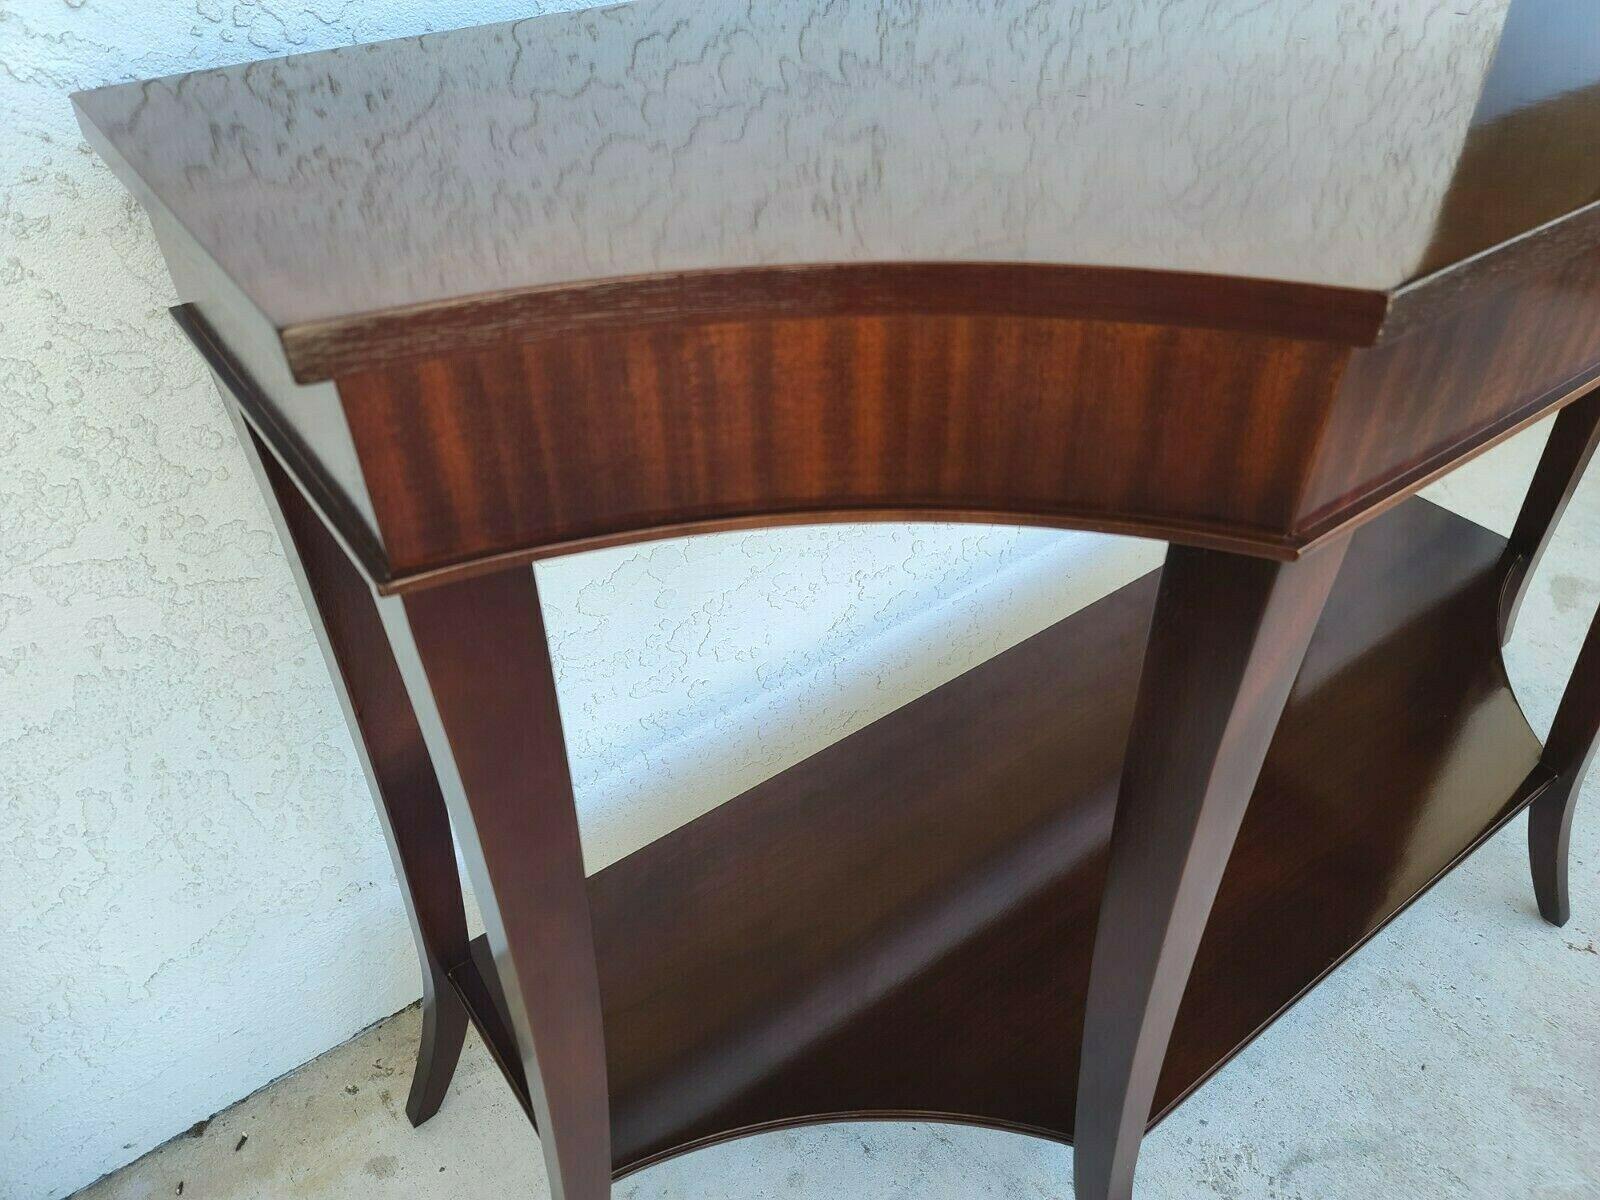 For FULL item description be sure to click on CONTINUE READING at the bottom of this listing.

Offering One Of Our Recent Palm Beach Estate Fine Furniture Acquisitions Of A 
Barbara Barry for Baker Furniture Modern Mahogany Console Sofa Entryway